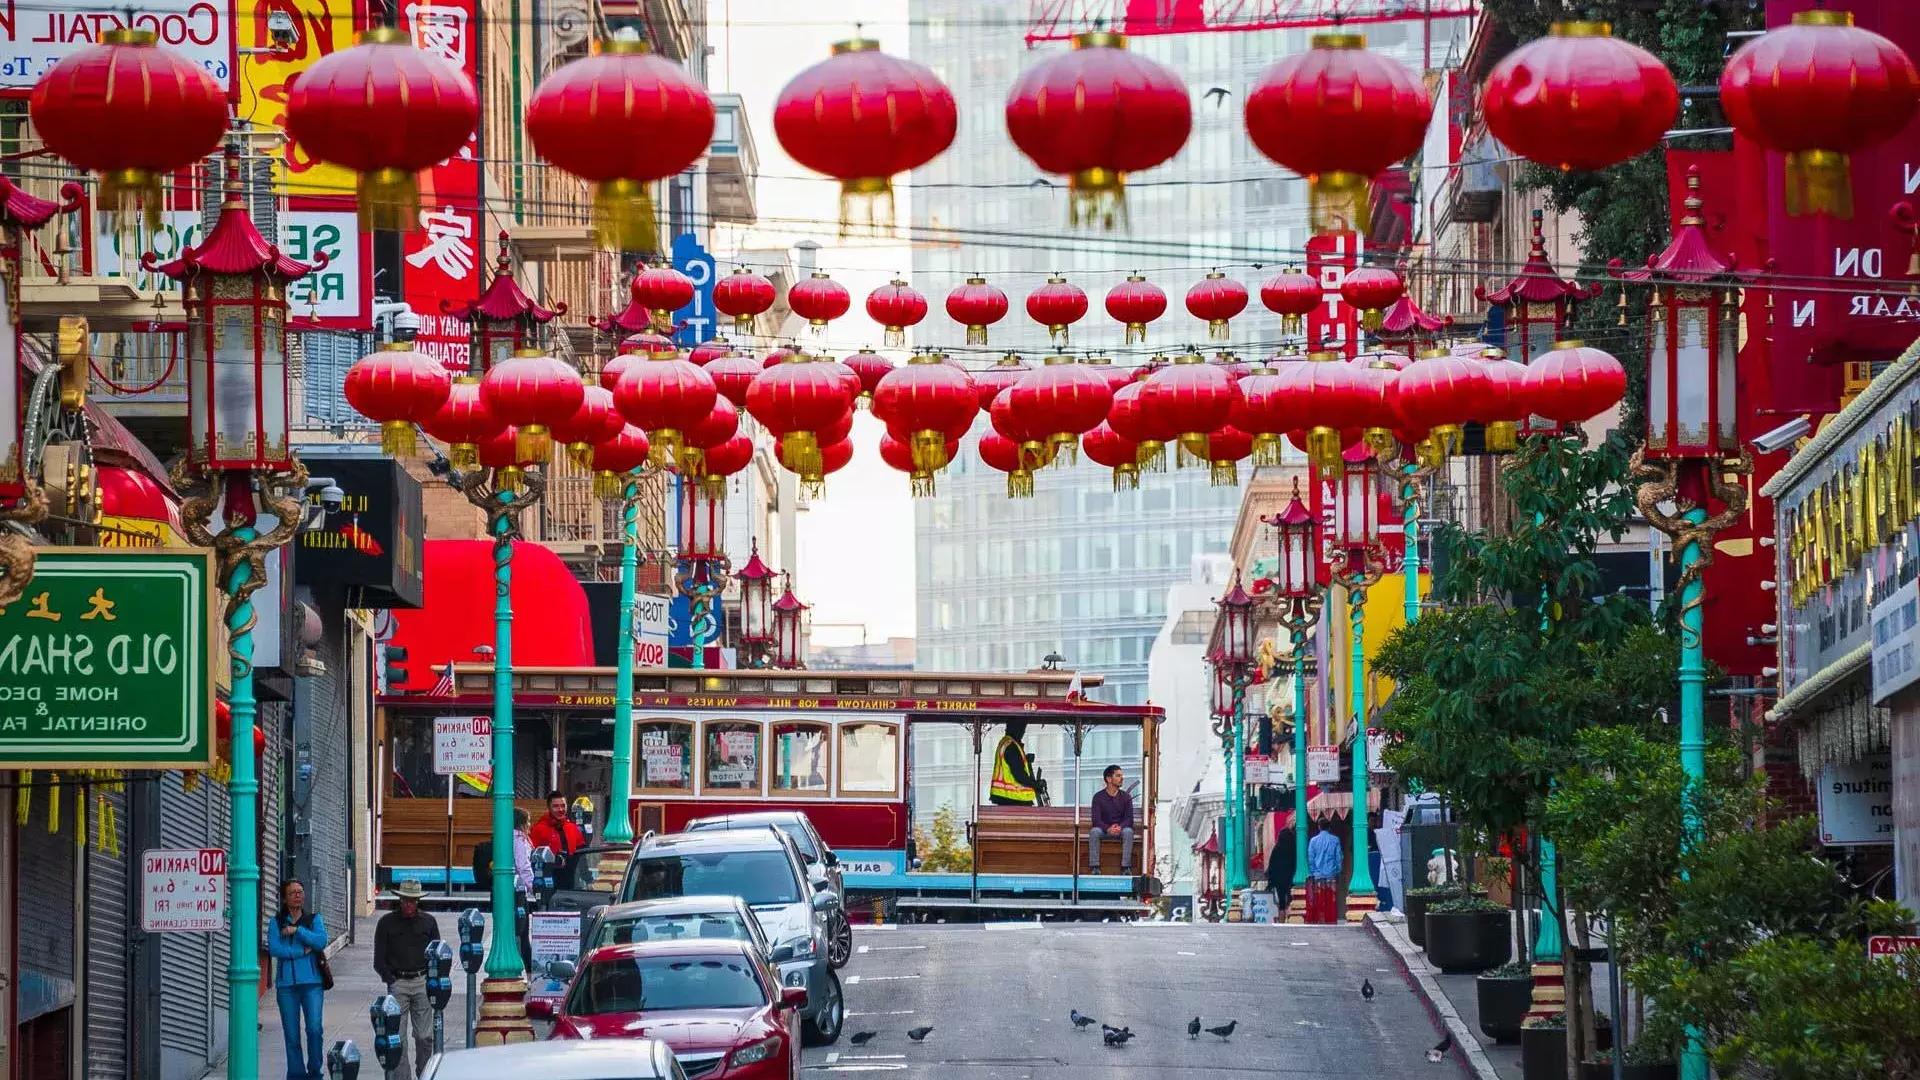 A hilly street in San Francisco's 唐人街 is pictured with red lanterns dangling and a streetcar passing by.